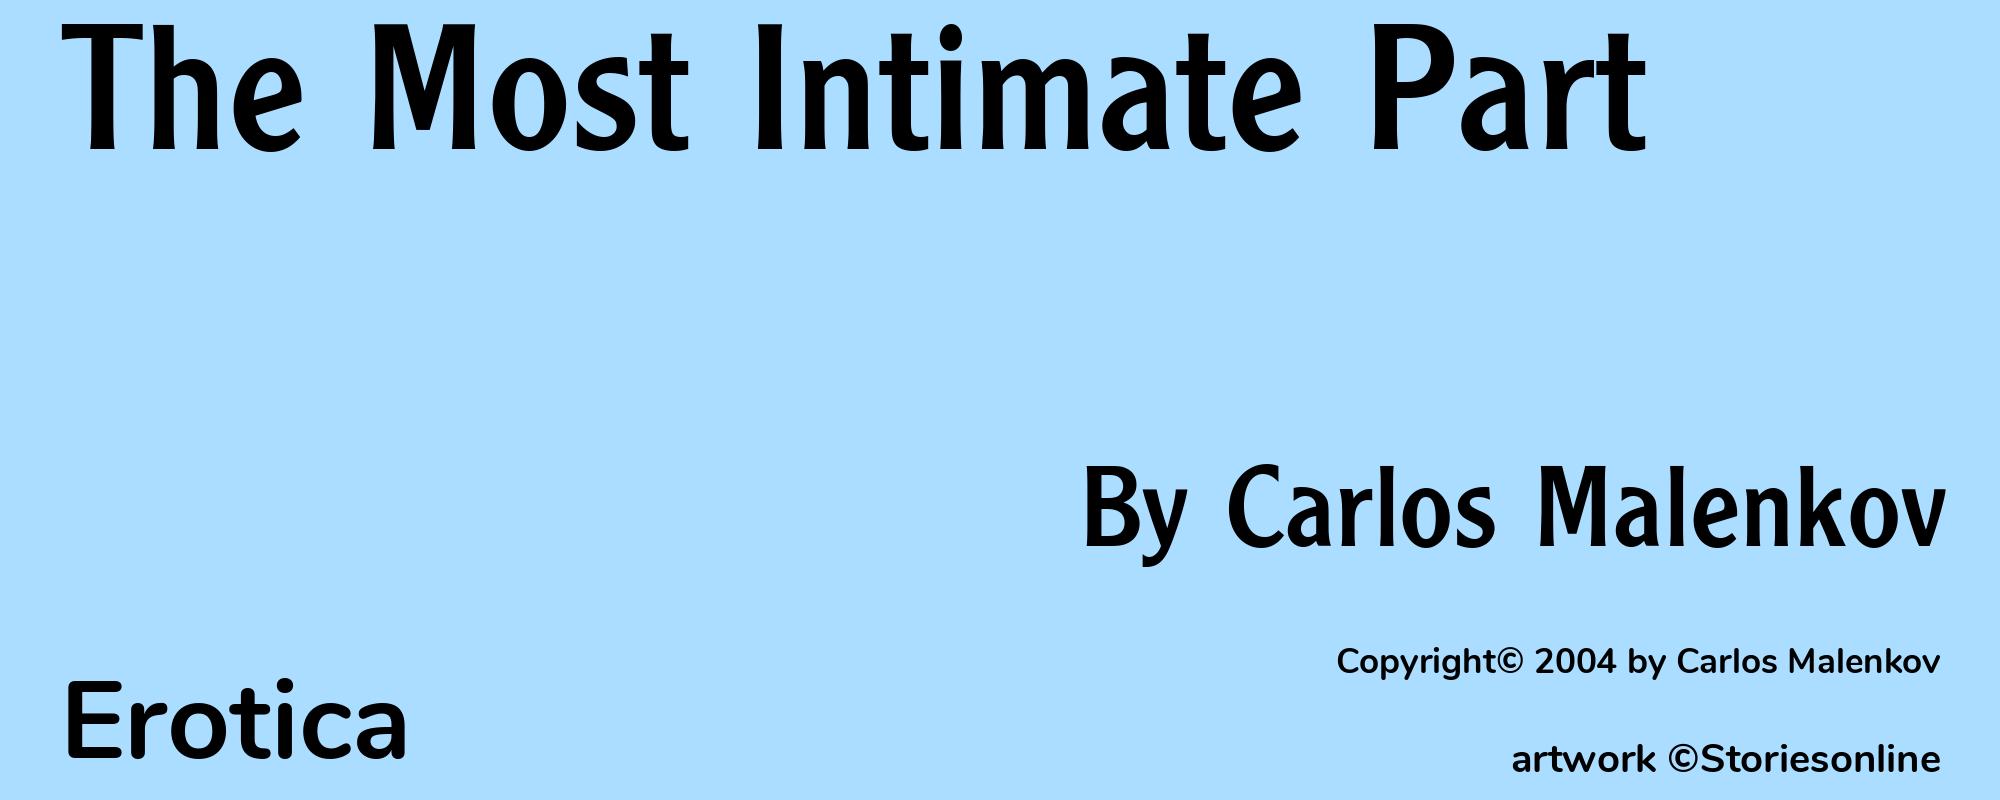 The Most Intimate Part - Cover